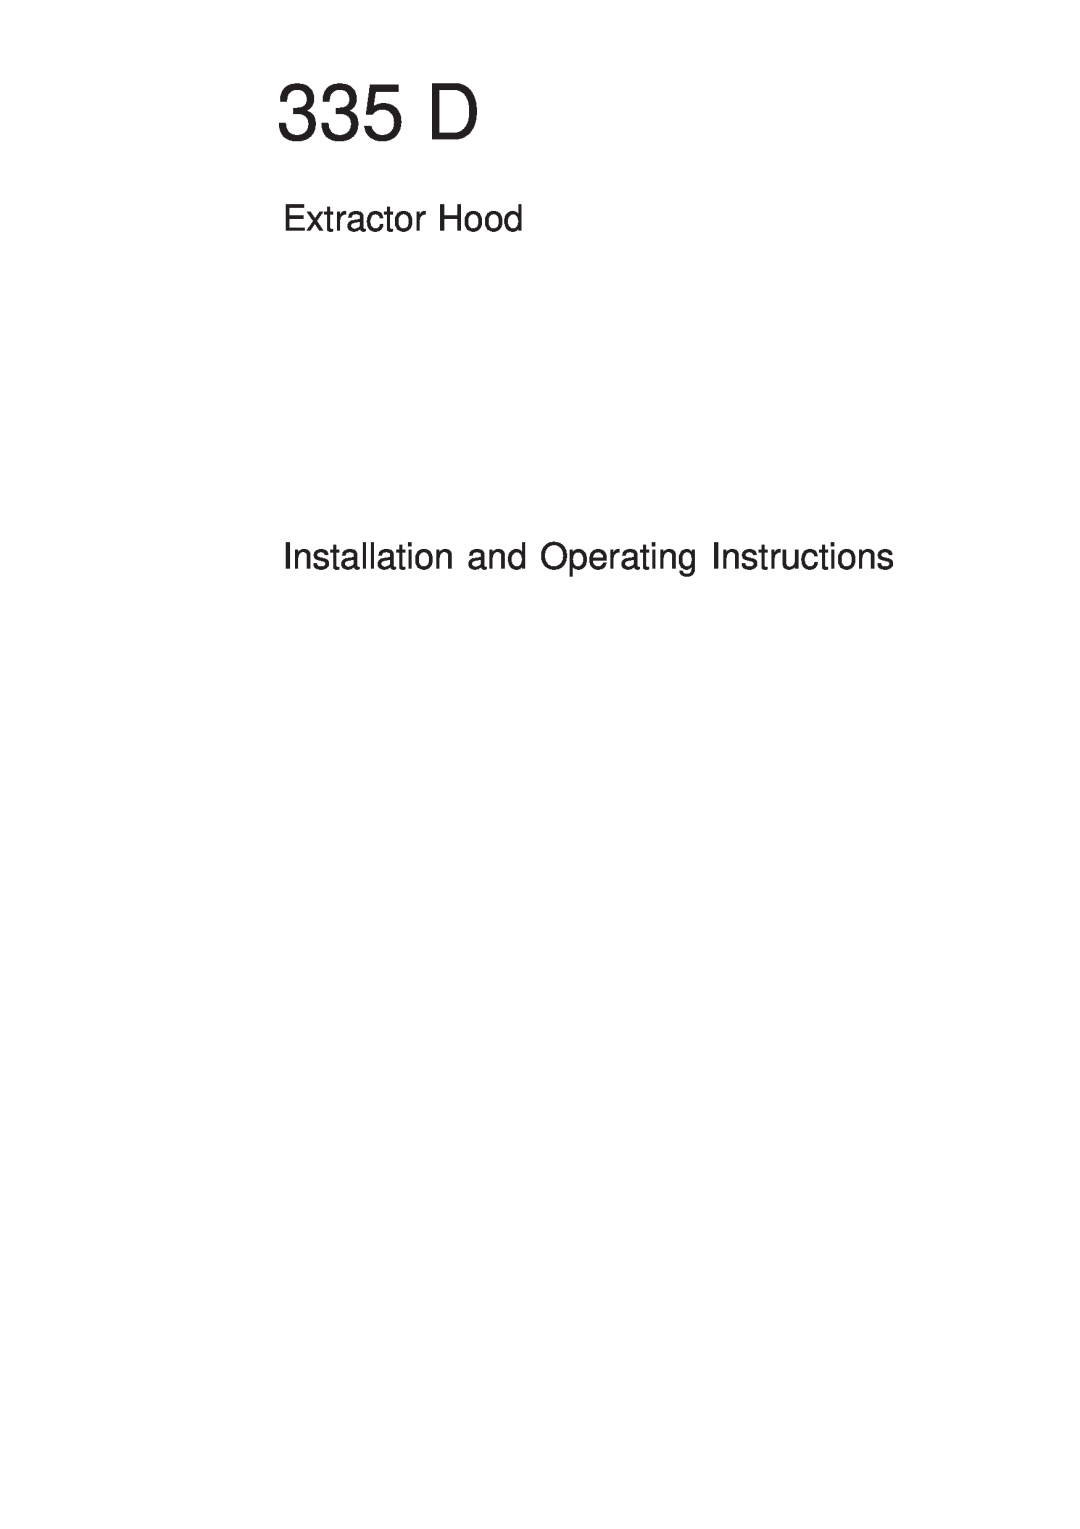 Electrolux 335 D operating instructions Extractor Hood Installation and Operating Instructions 